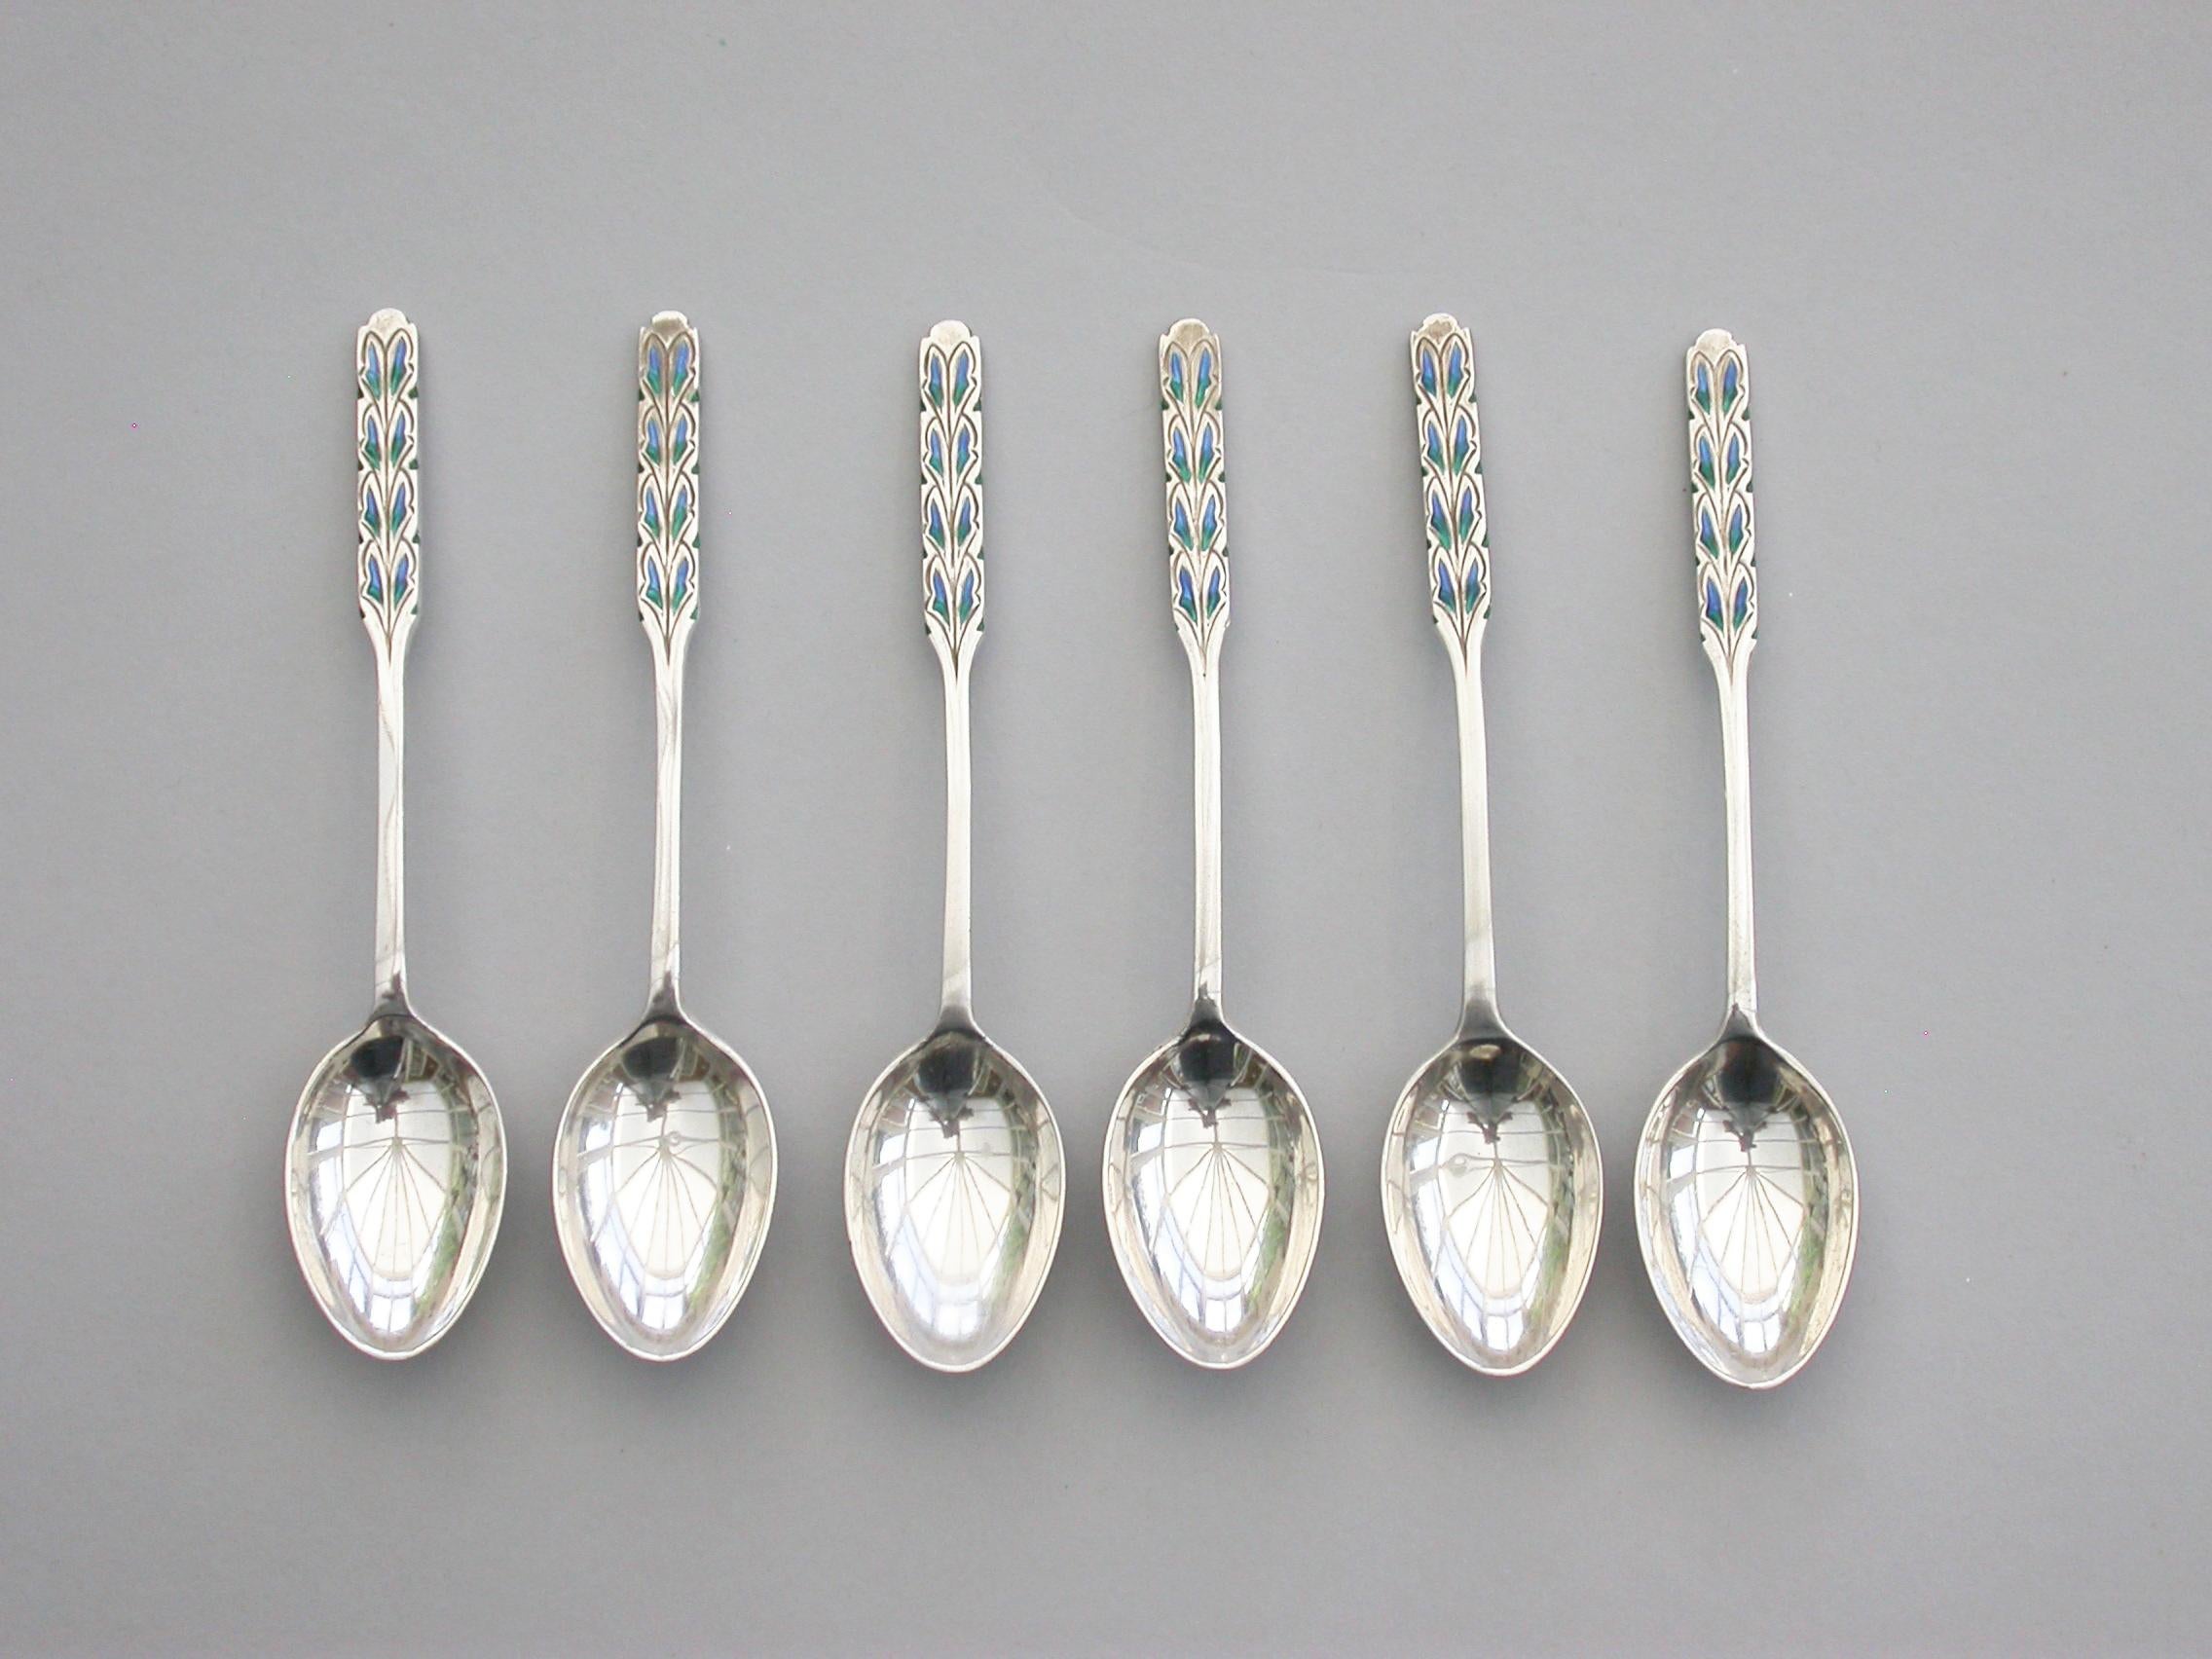 Other Cased Set 12 Silver and Enamel Pastry Spoons & Forks by Liberty & Co, 1927-1928 For Sale